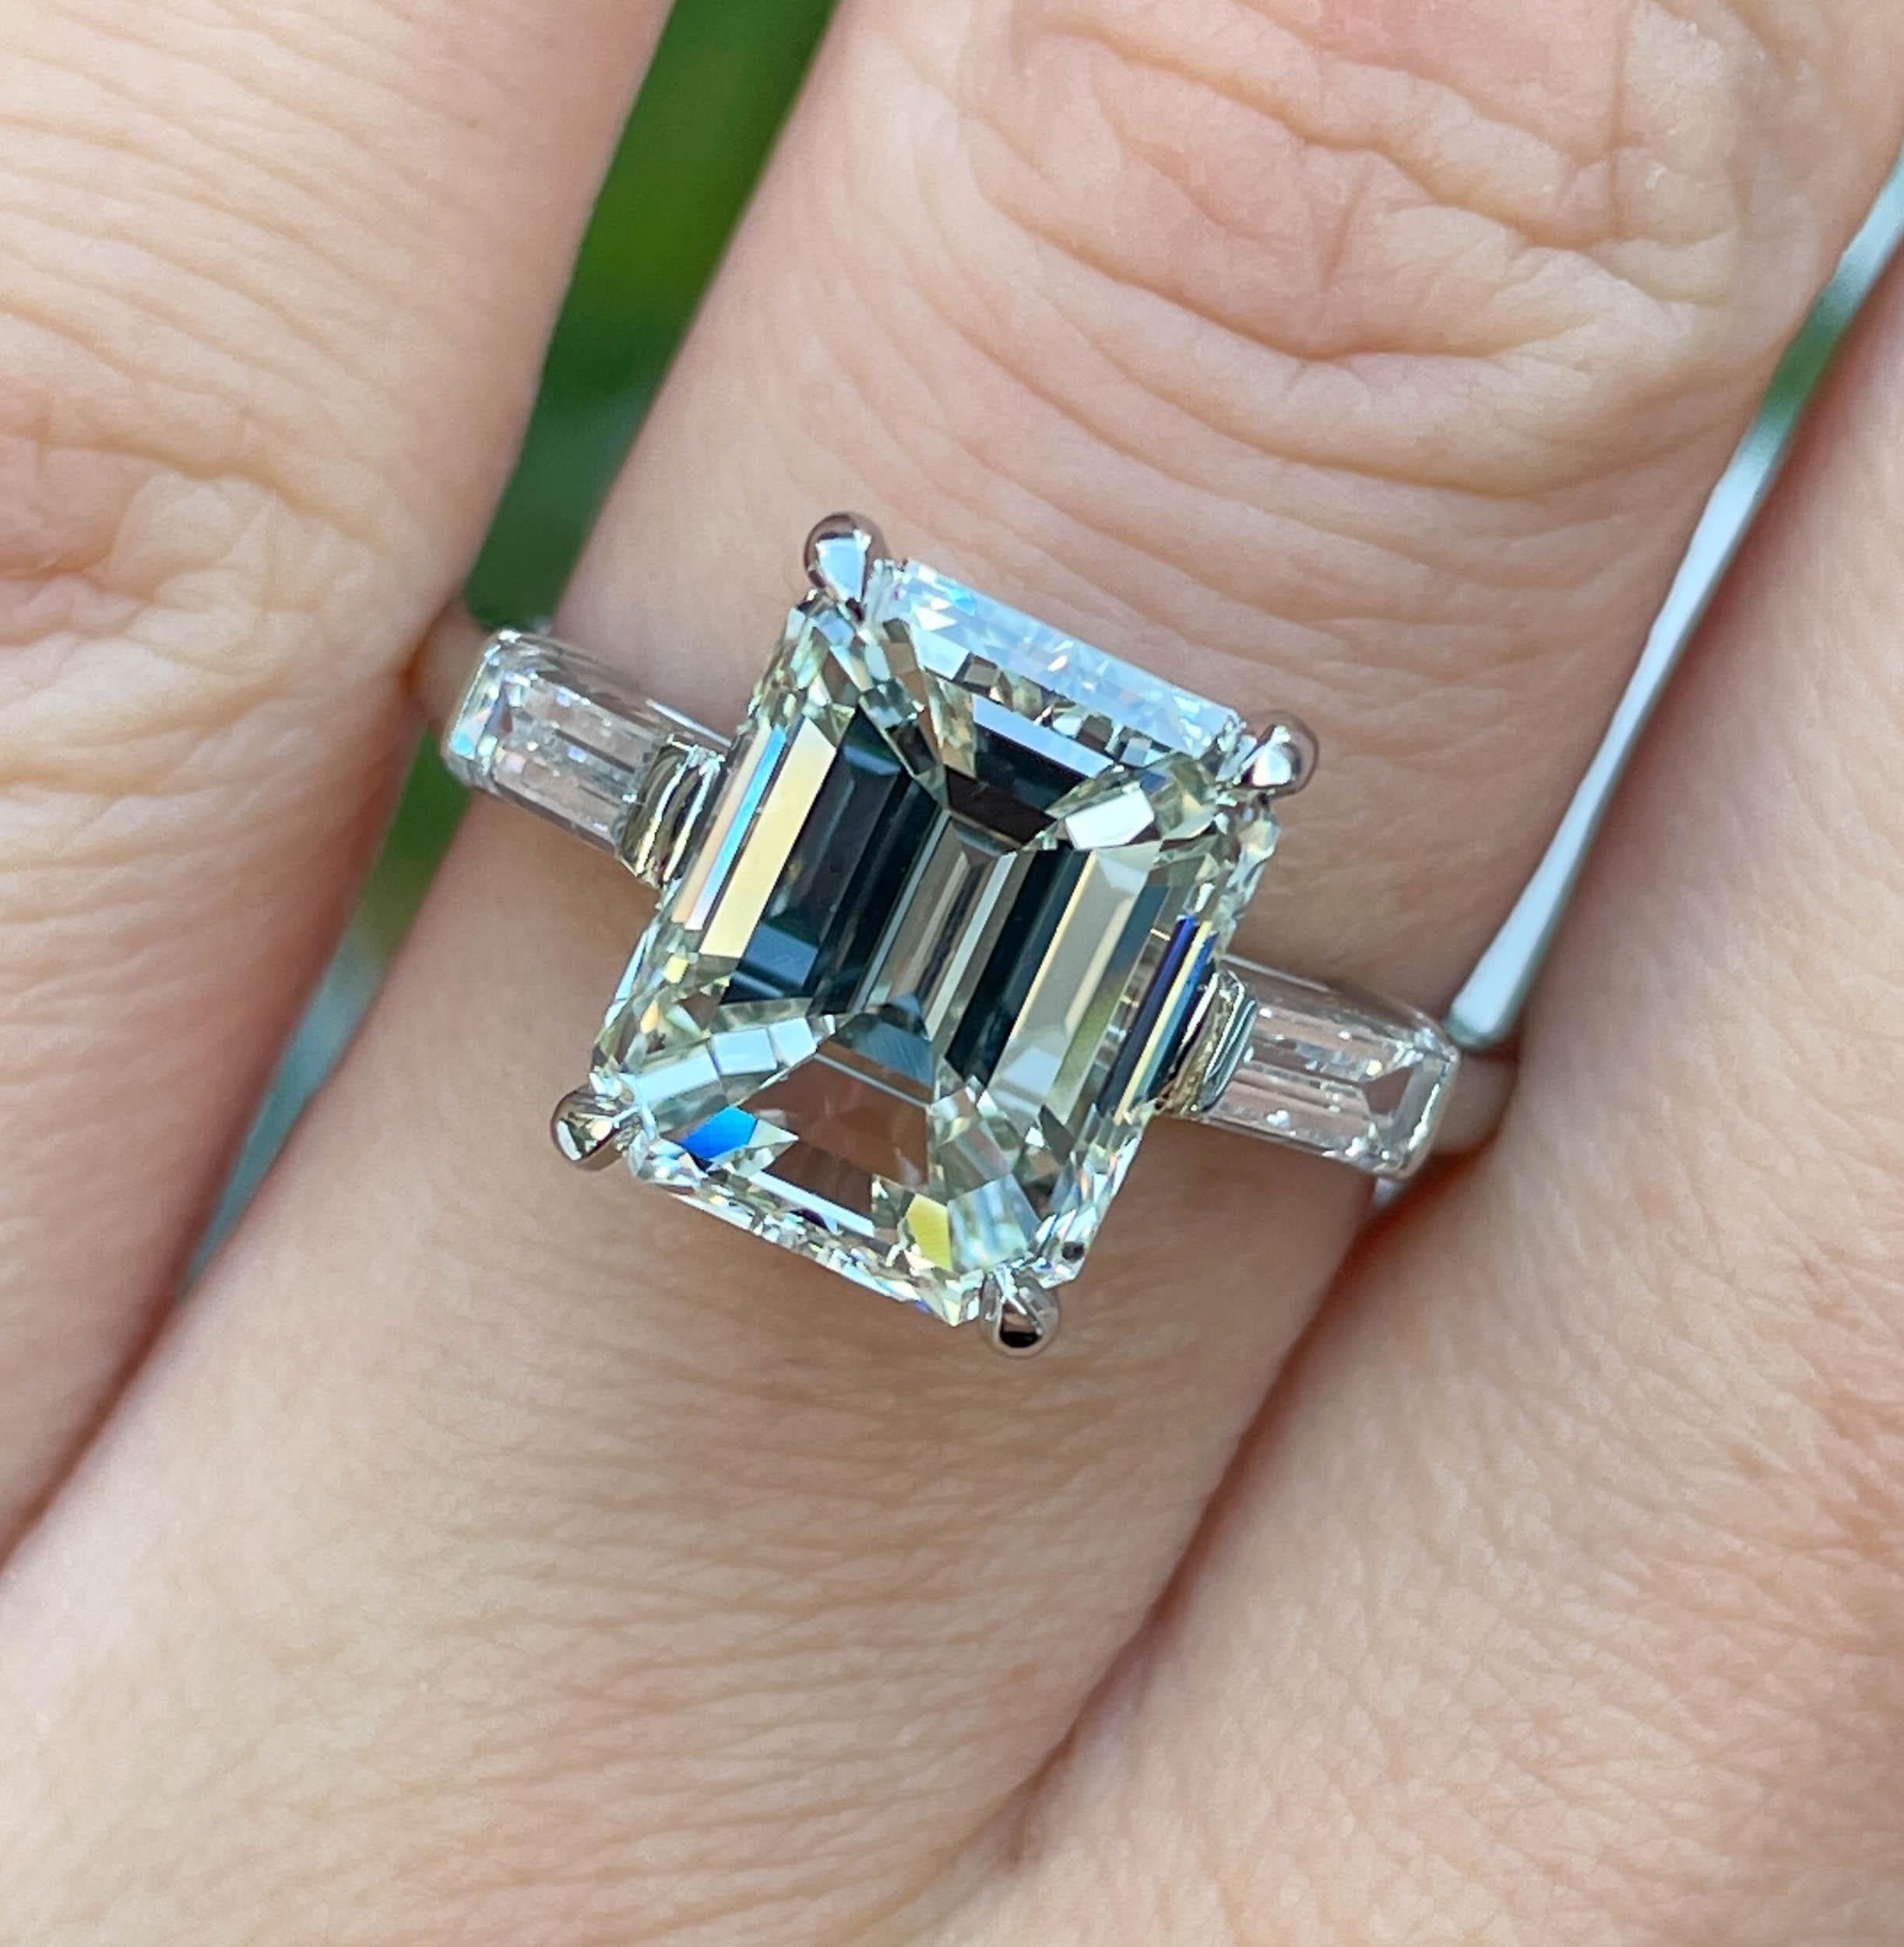 A Breathtaking Estate Vintage HANDMADE PLATINUM (stamped) Engagement ring dazzles GIA certified 4.02ct Emerald Diamond center diamond in K color SI1 clarity (Near COLORLESS and Eye clear); with measurements of 10.19x8.04x5.59mm. 
It is set with 2